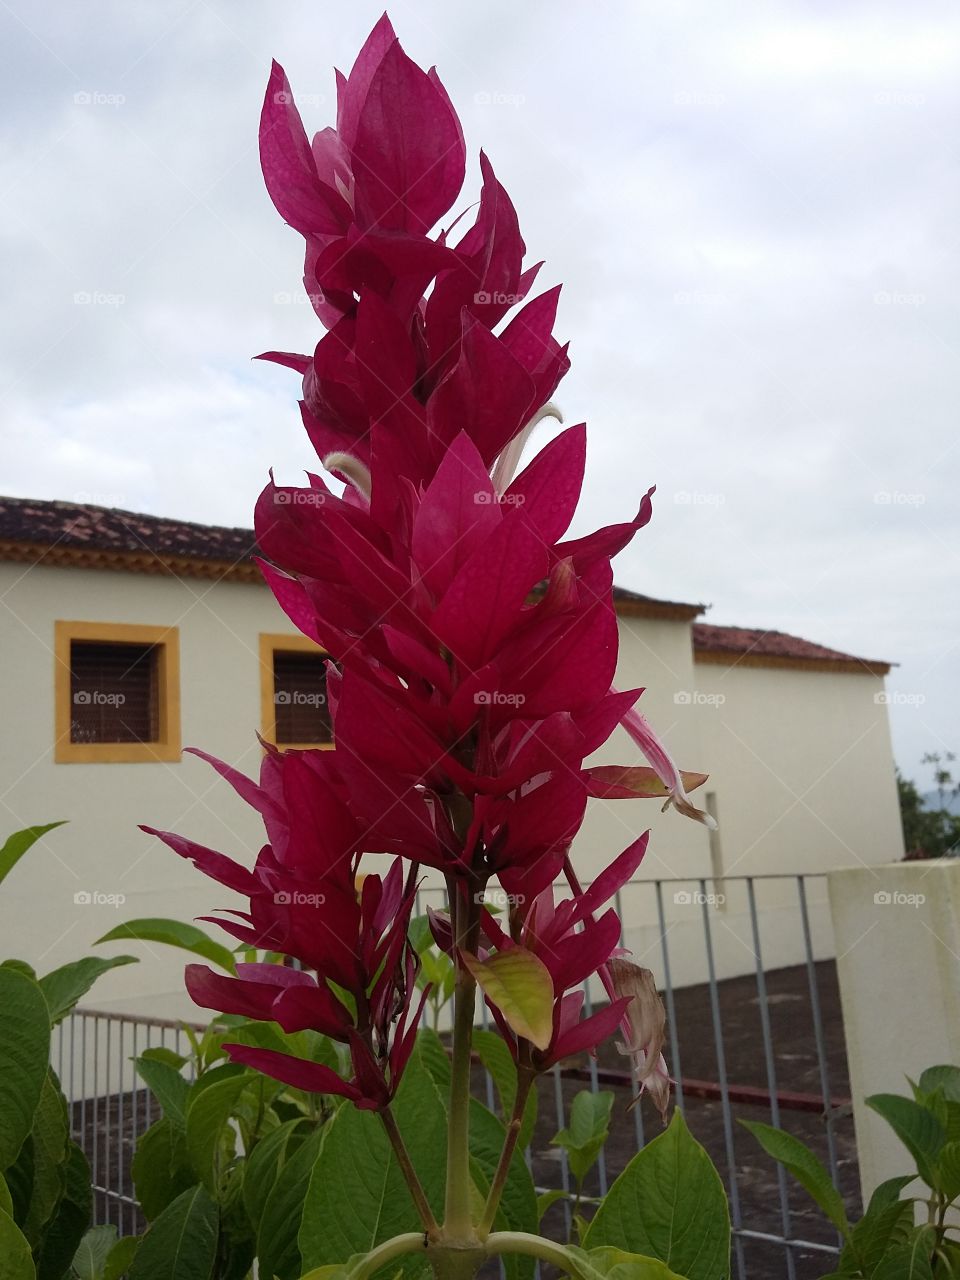 Typical flower from northeastern Brazil.